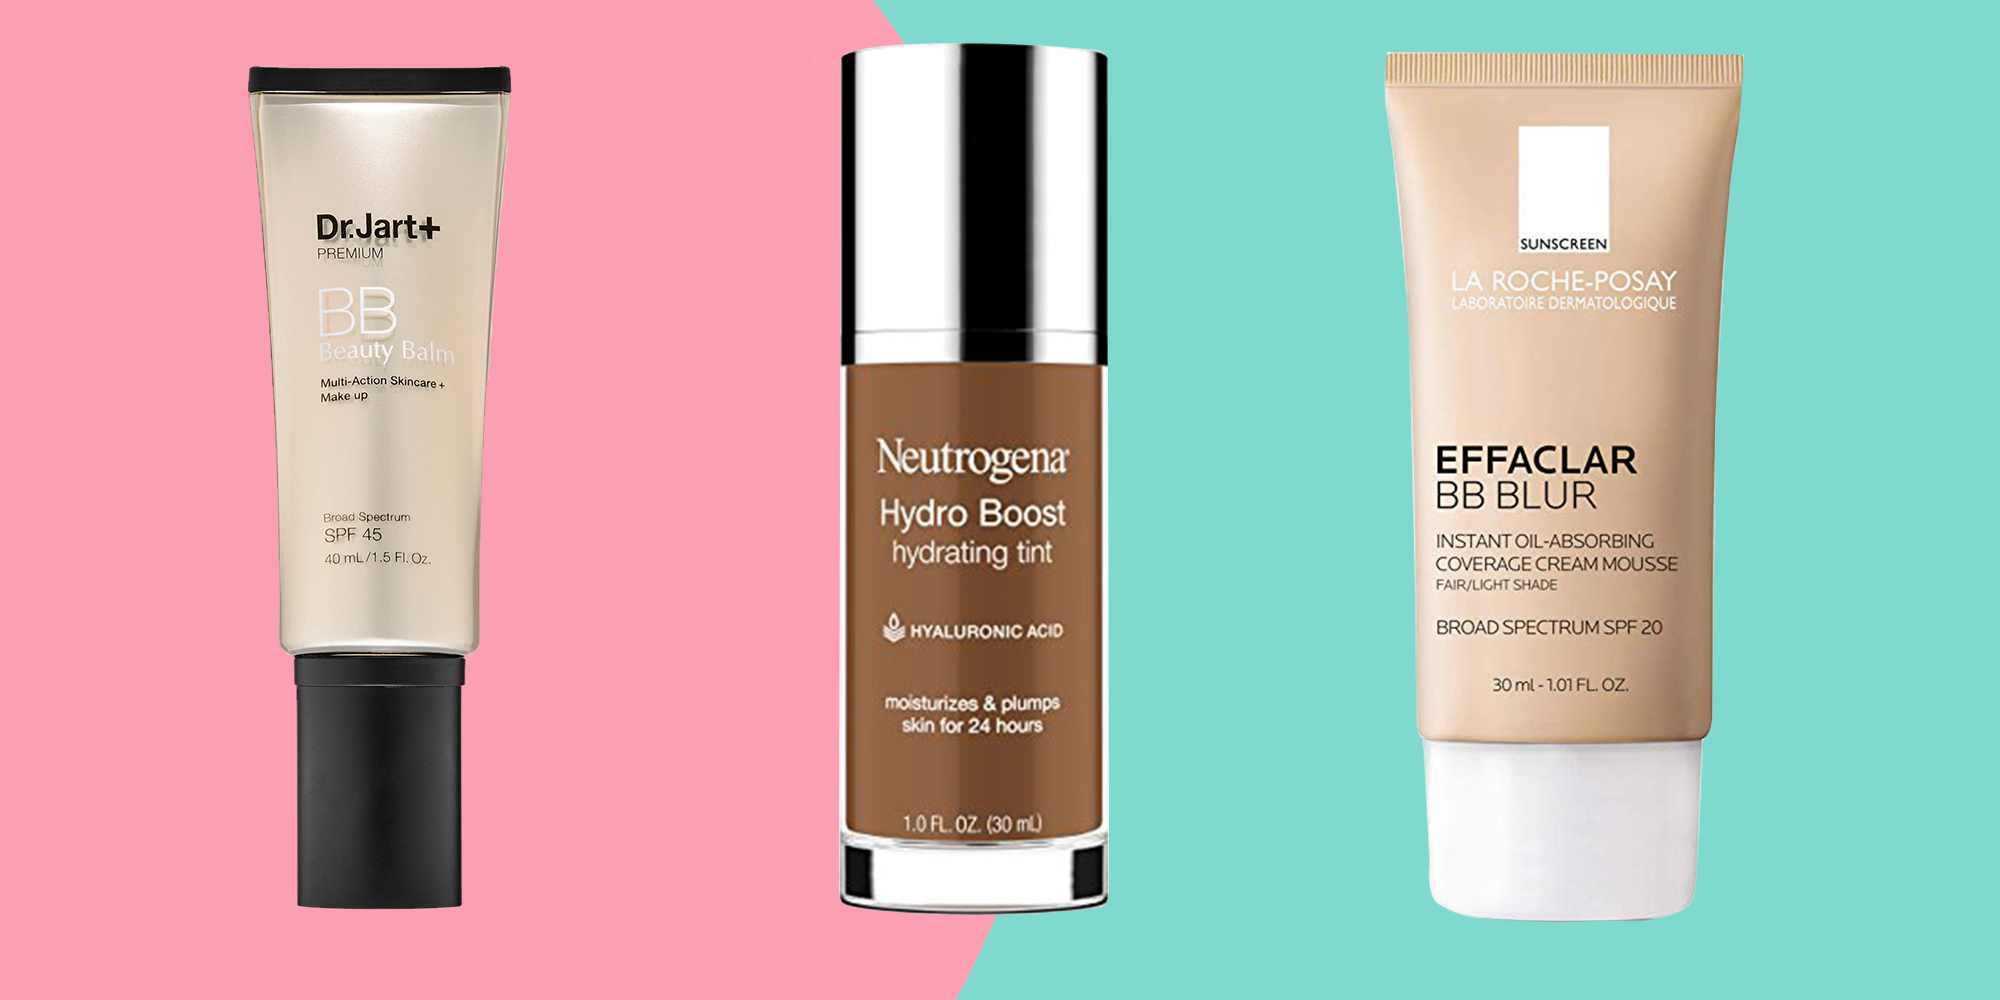 Which one is good for oily skin, BB Cream OR CC Cream? — Posh